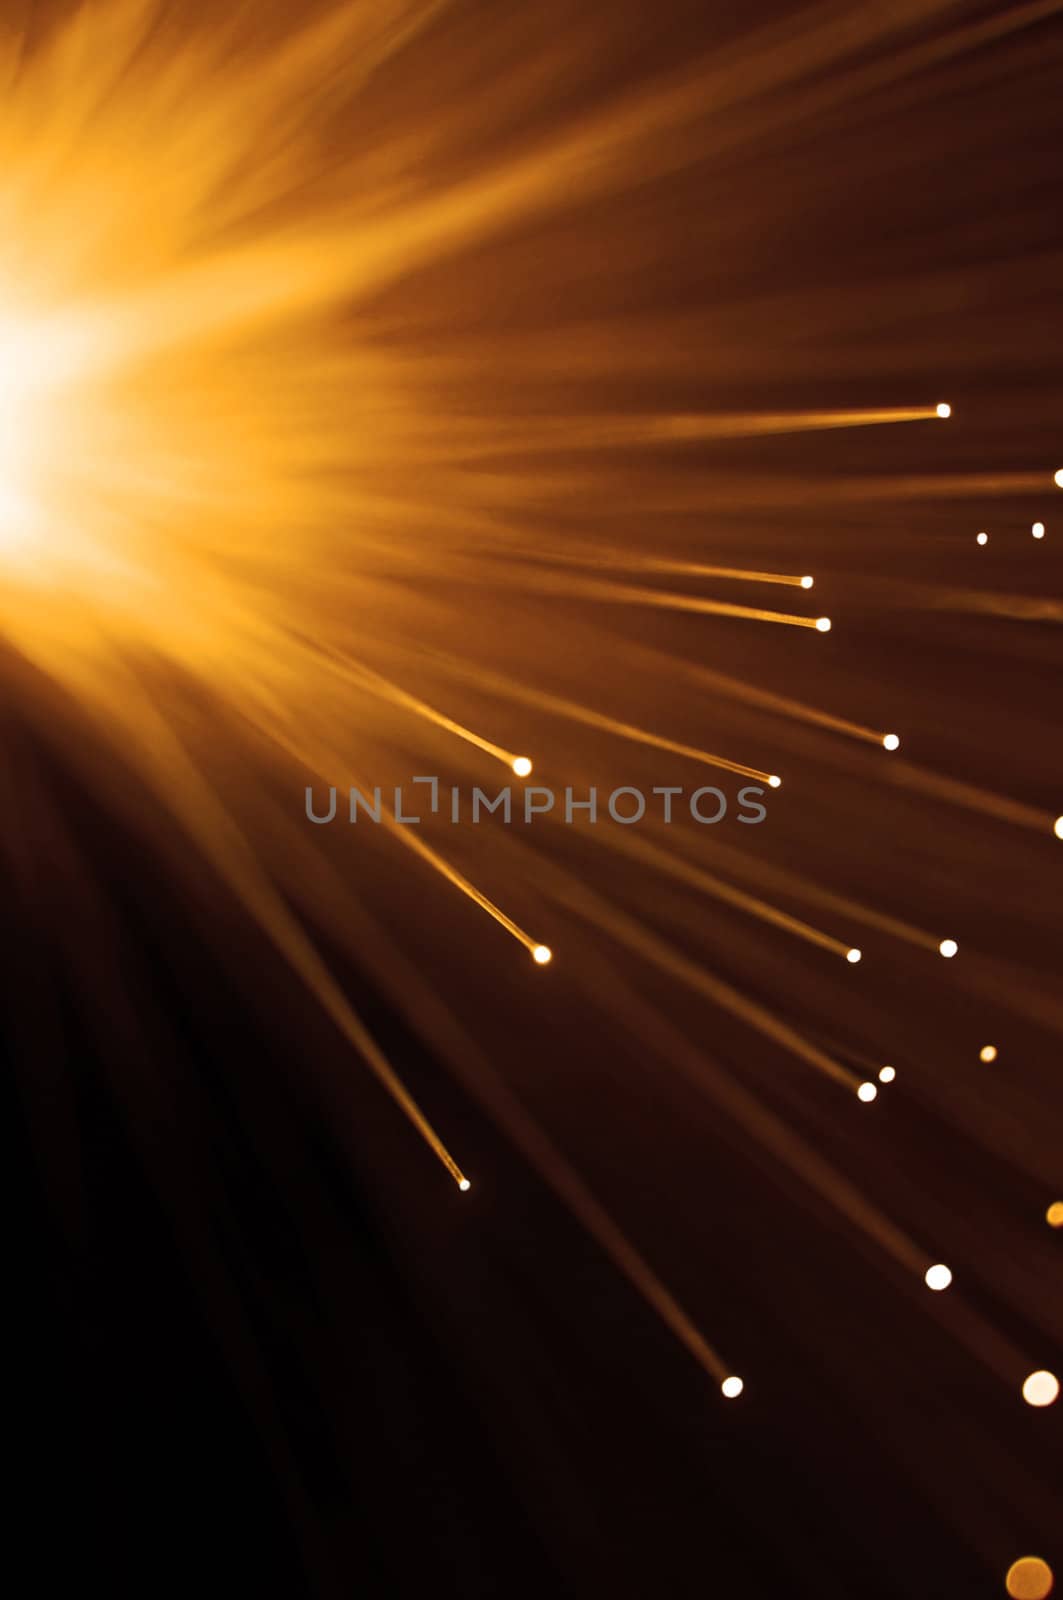 Abstract style close up capturing the ends of golden fibre optic light strands against dark background.